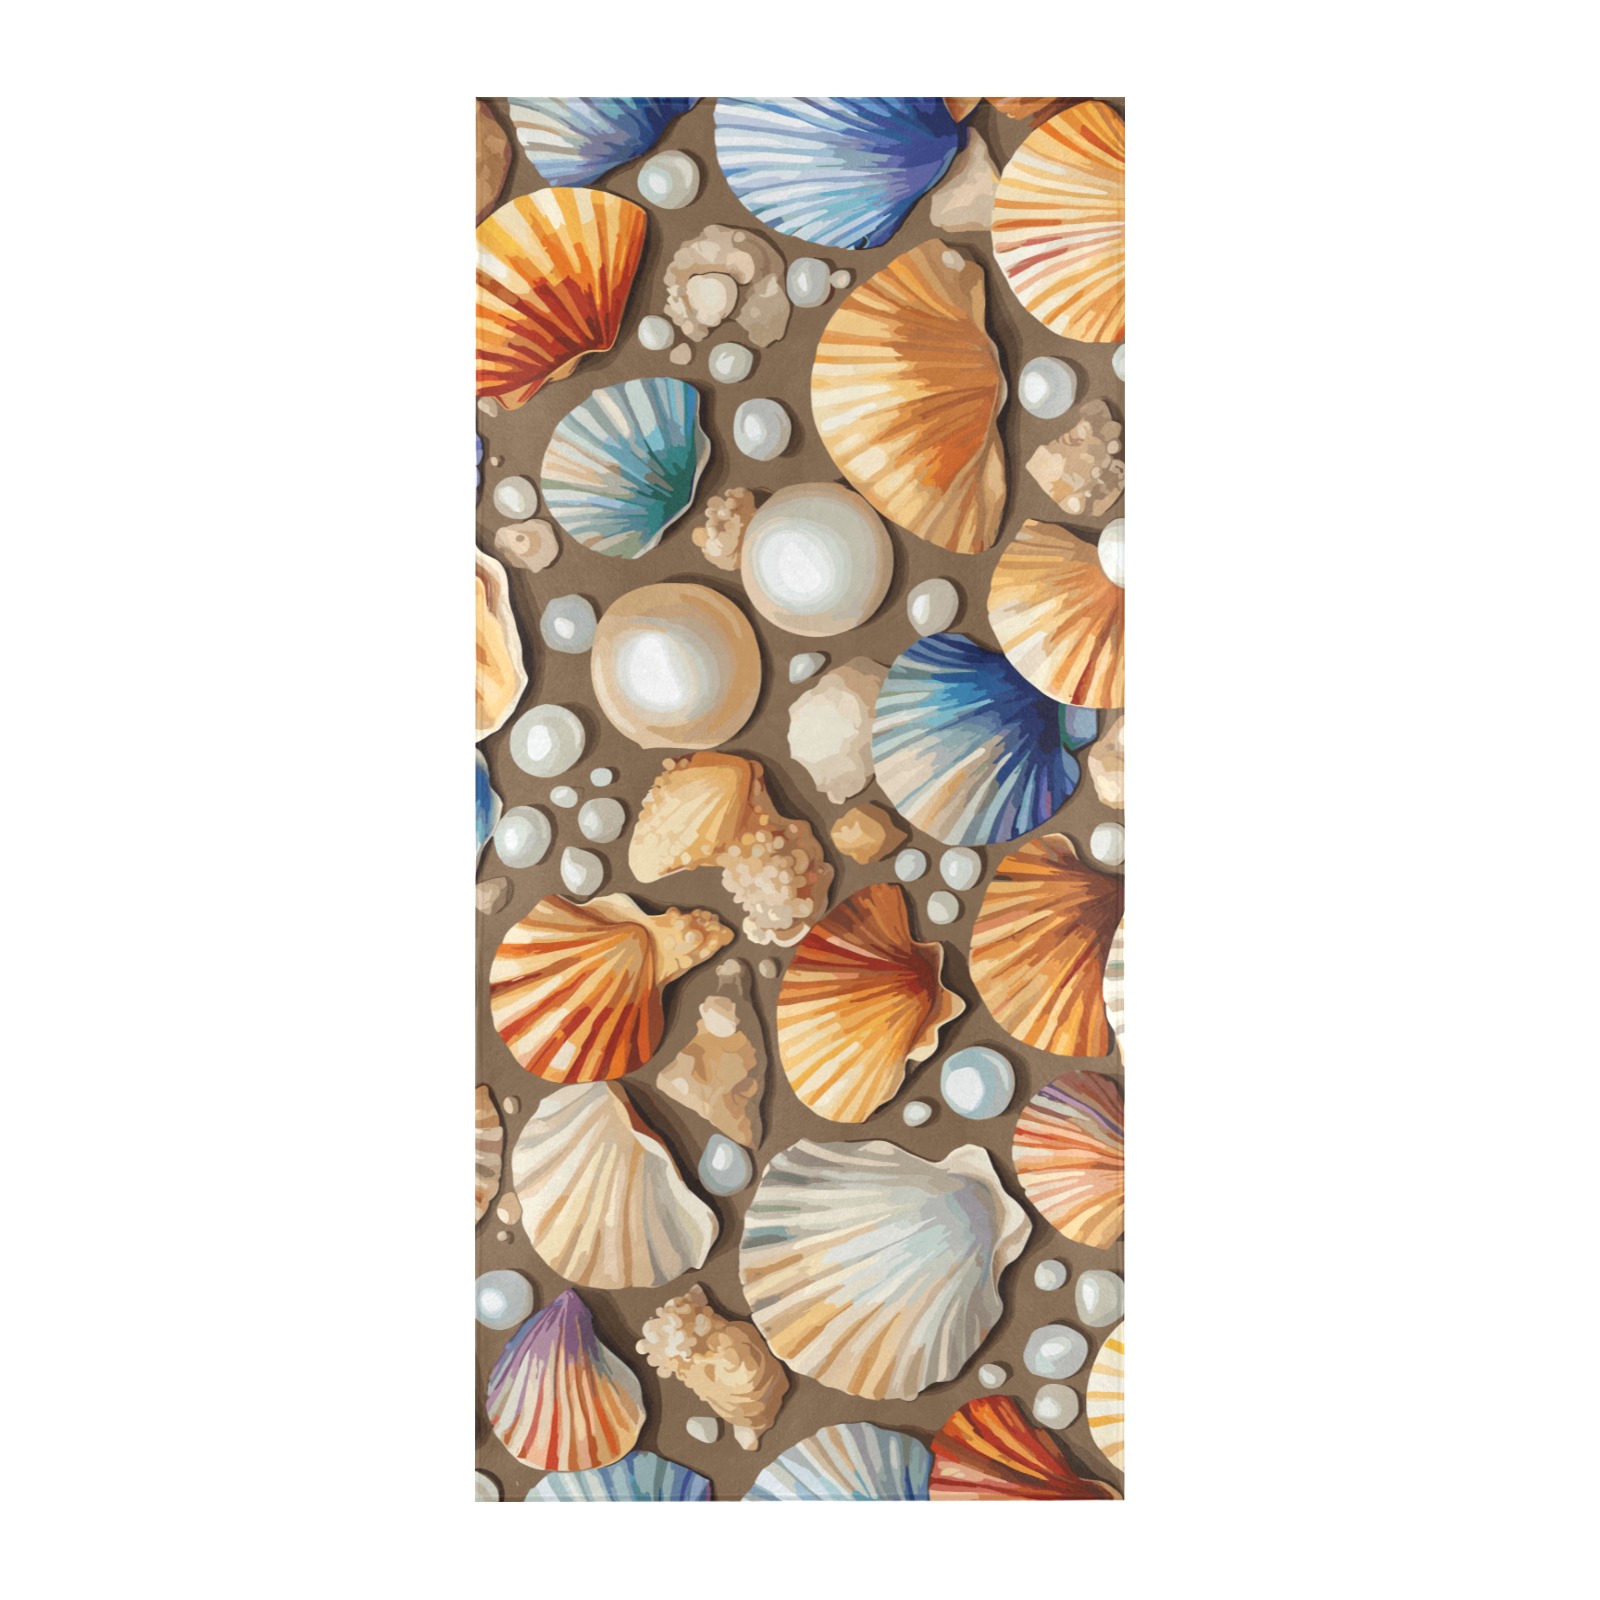 A mix of pearls, shells on the sand colorful art. Beach Towel 32"x 71"